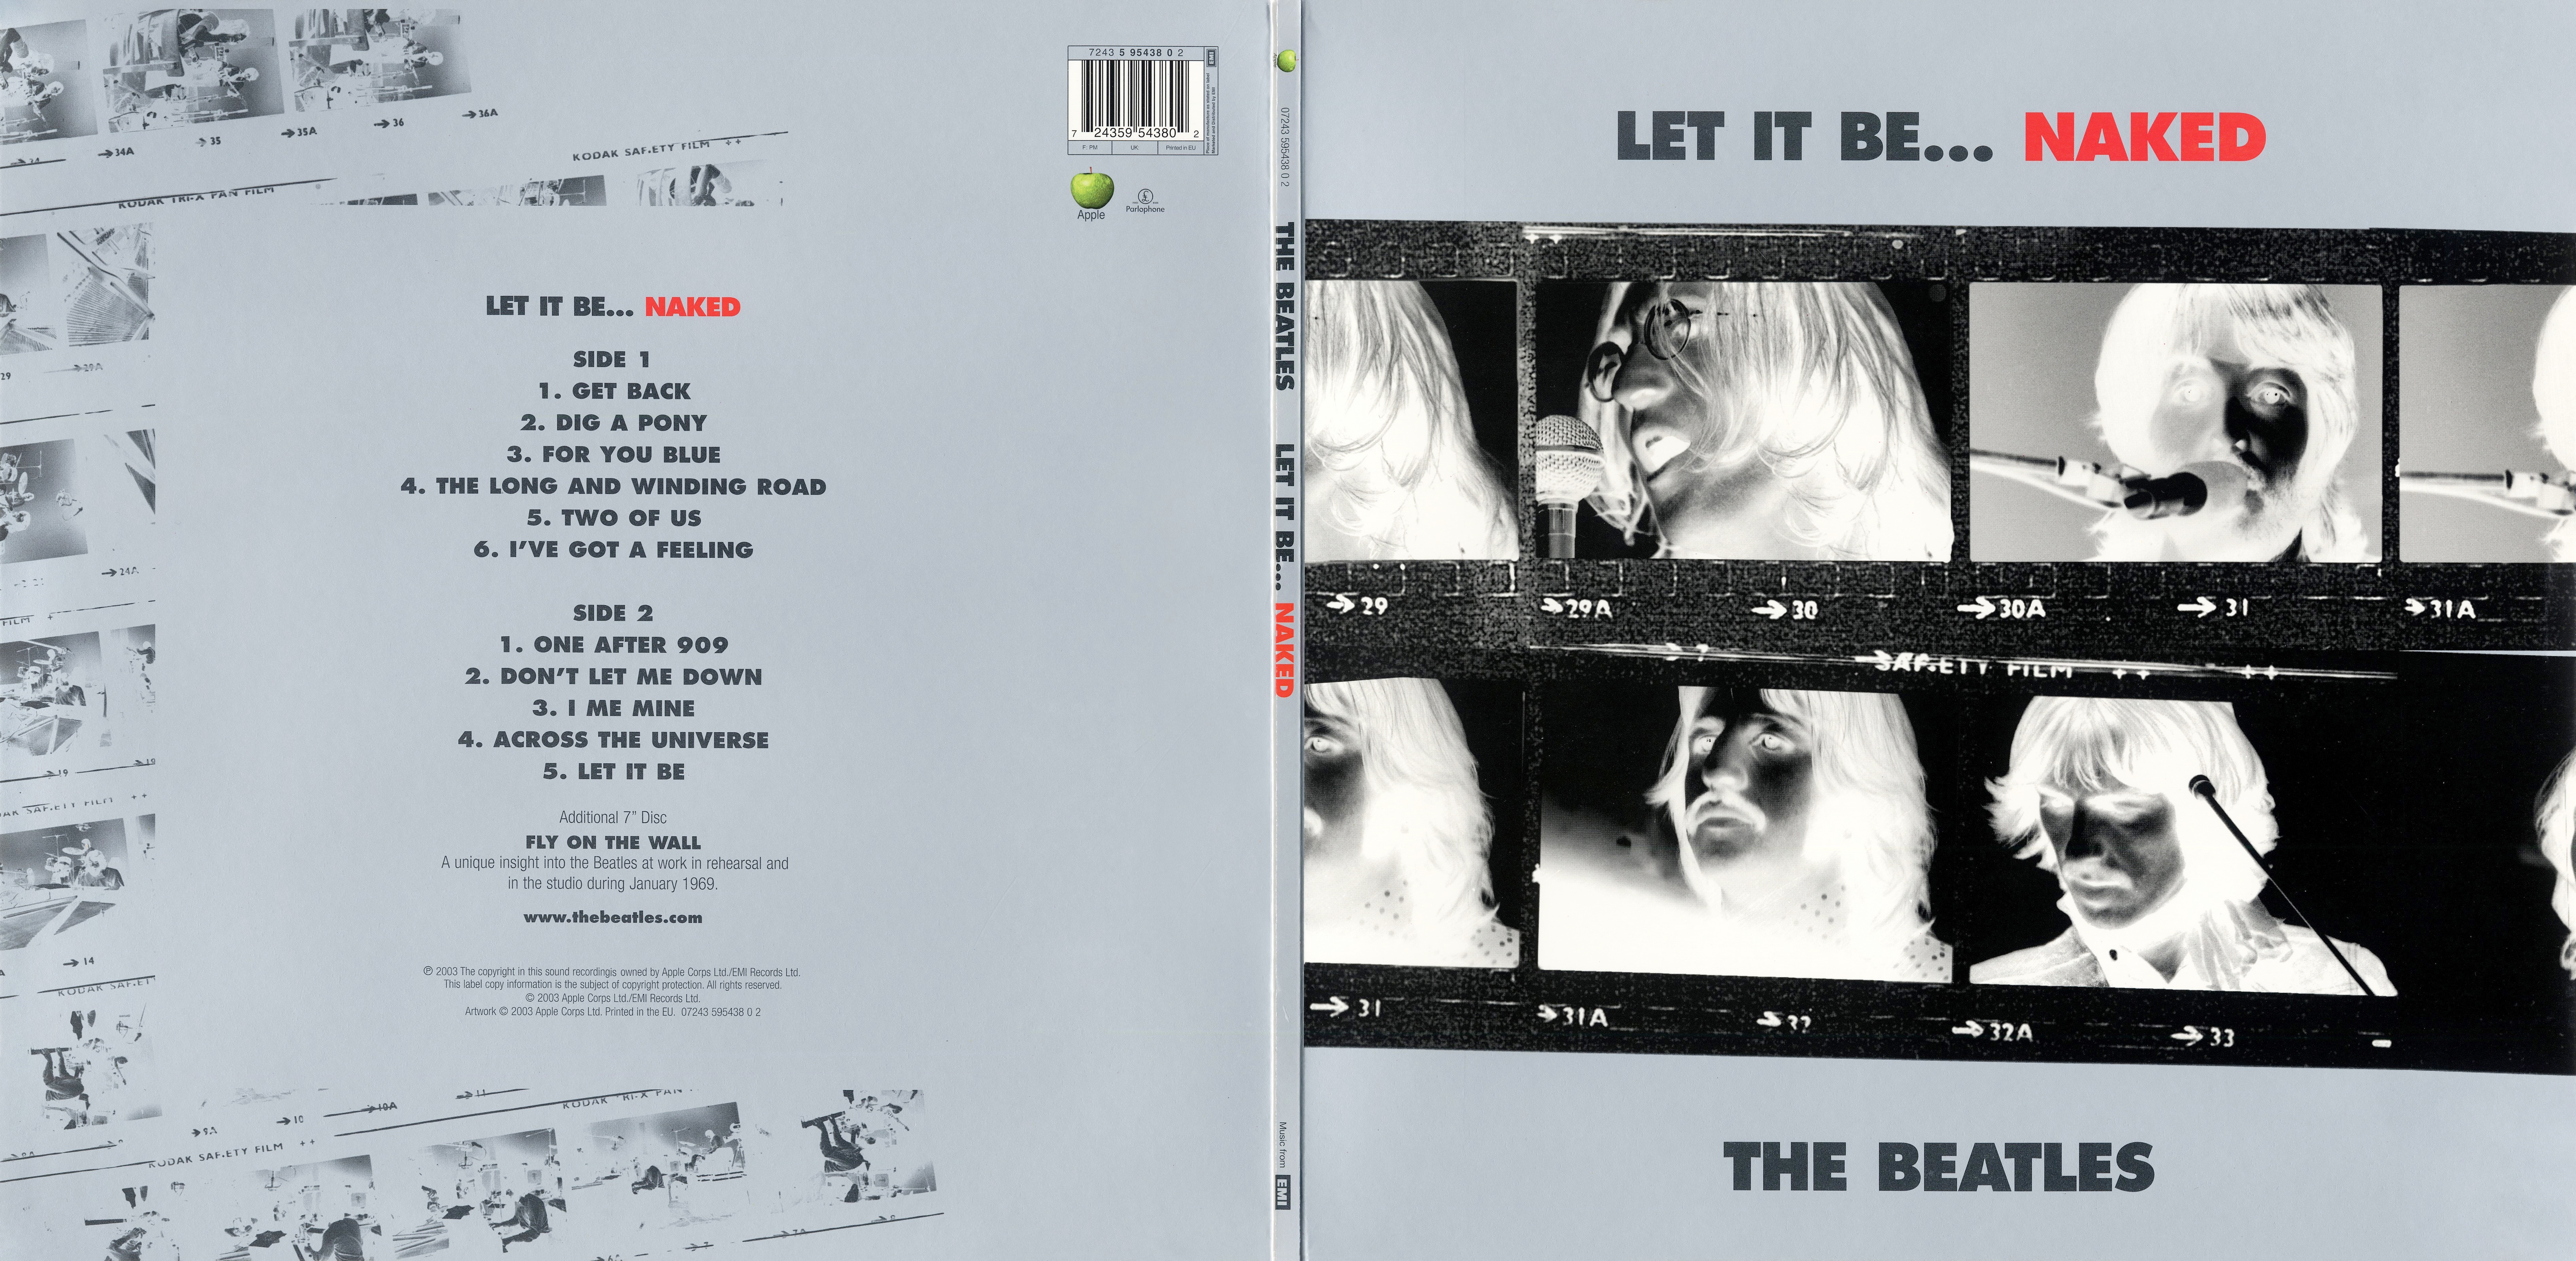 The Beatles Collection » Let It Be… Naked, Apple – Parlophone 7243